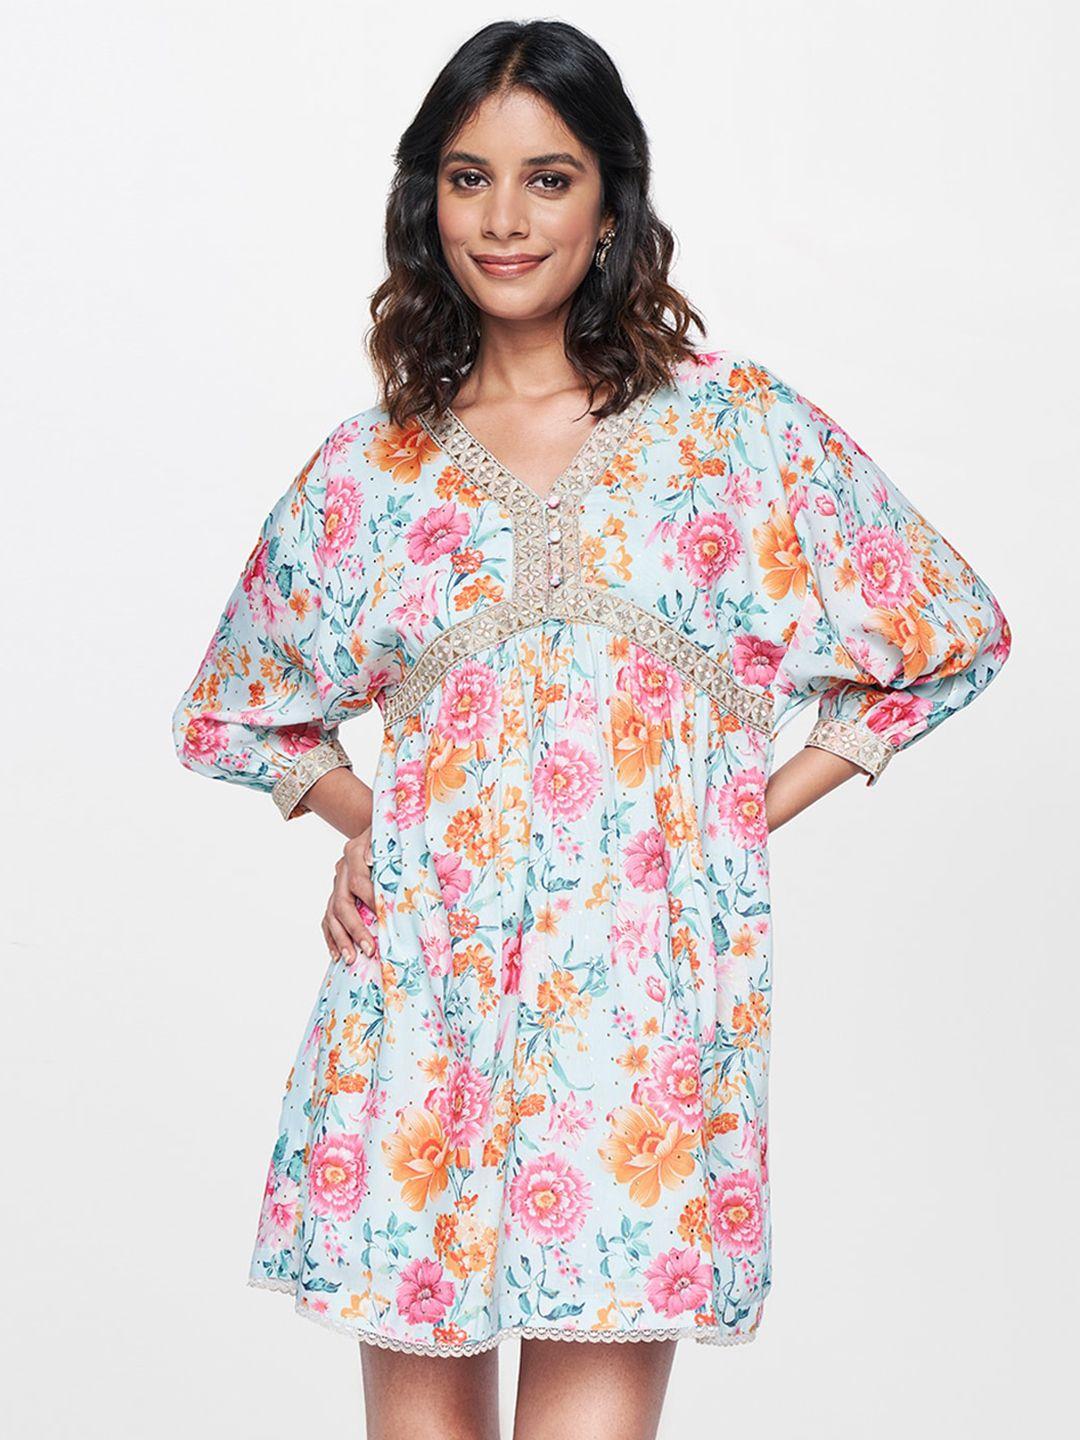 global desi floral printed gathered cuffed sleeves gathered a-line dress